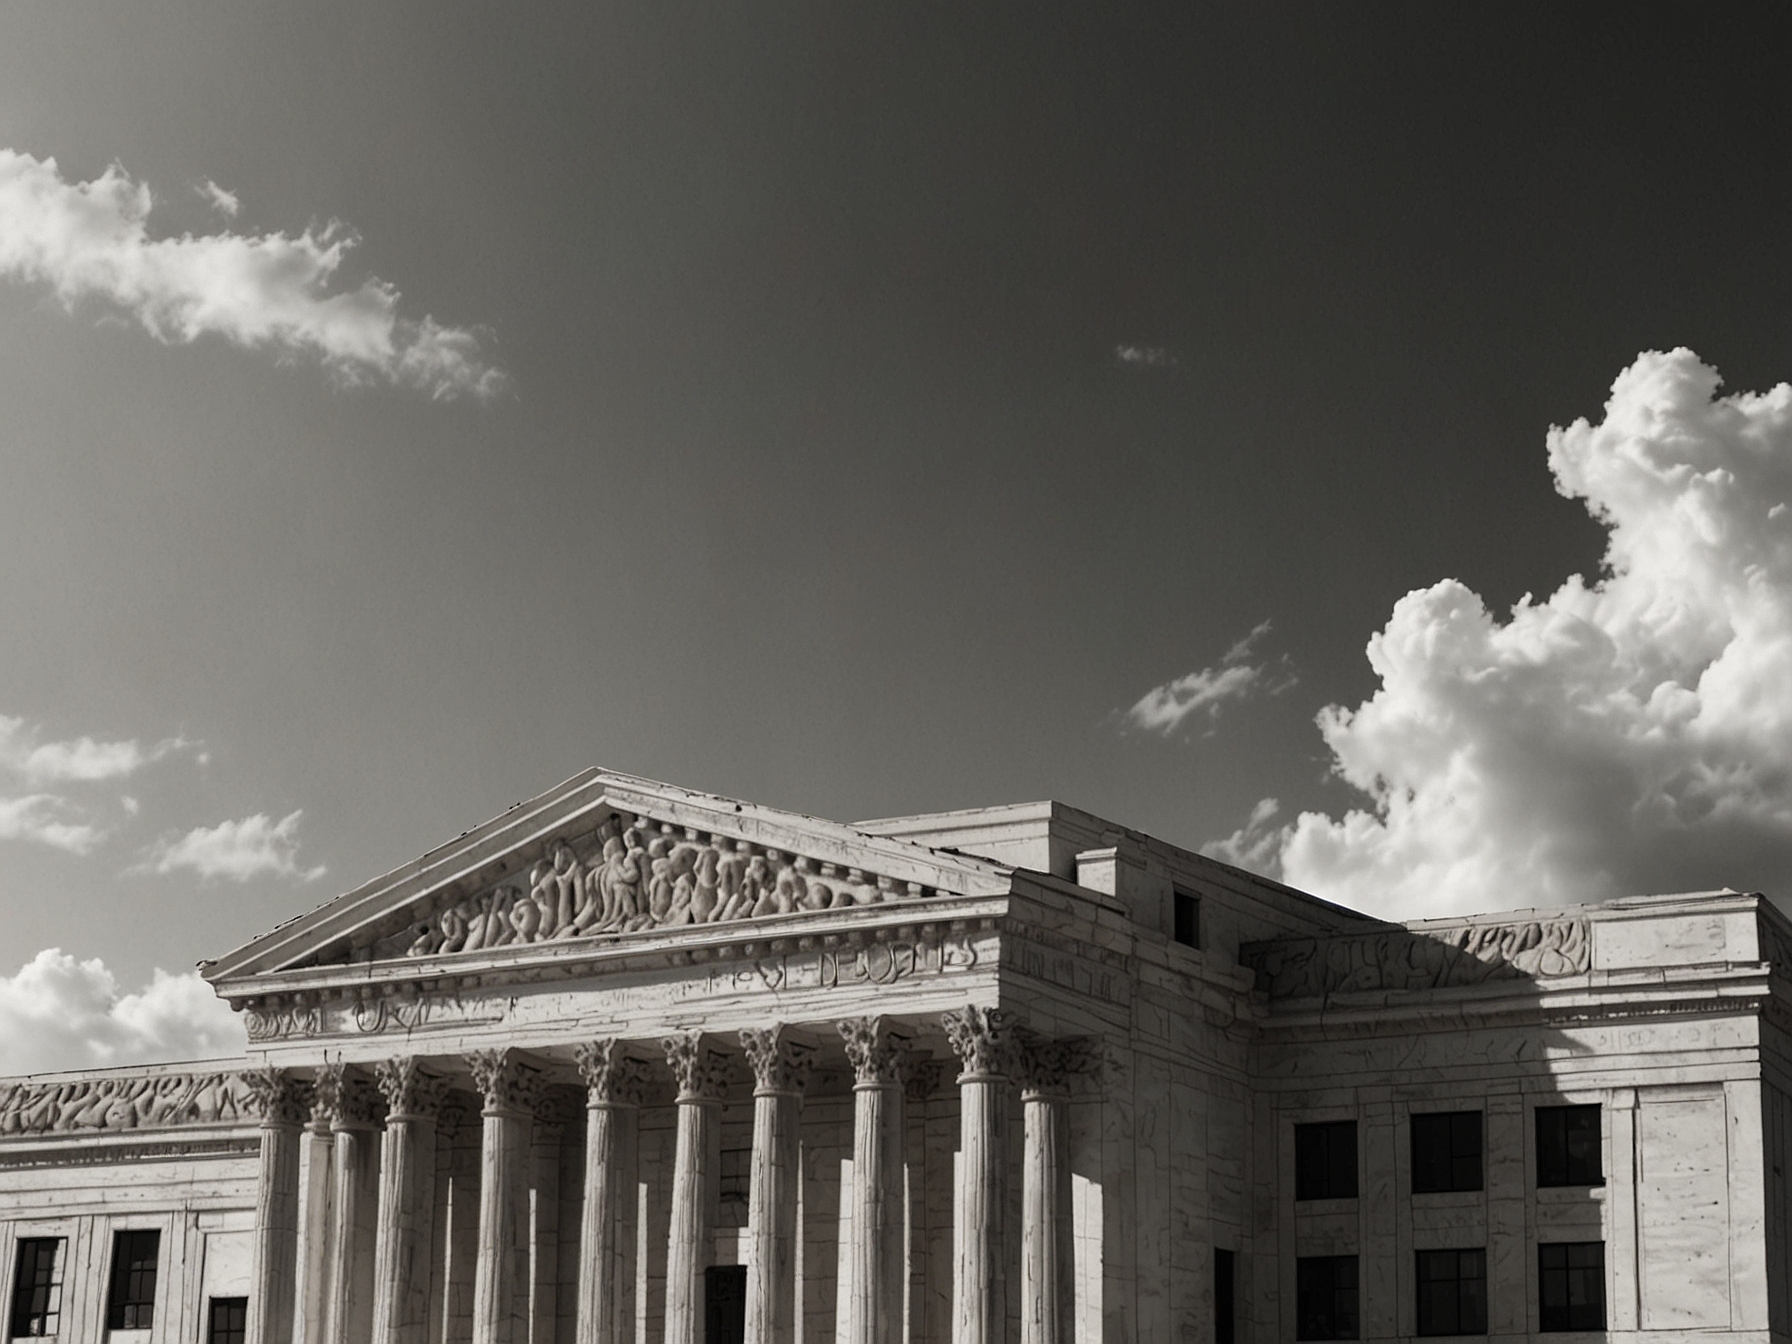 Image of the U.S. Supreme Court Building in Washington, D.C., with clear skies overhead.